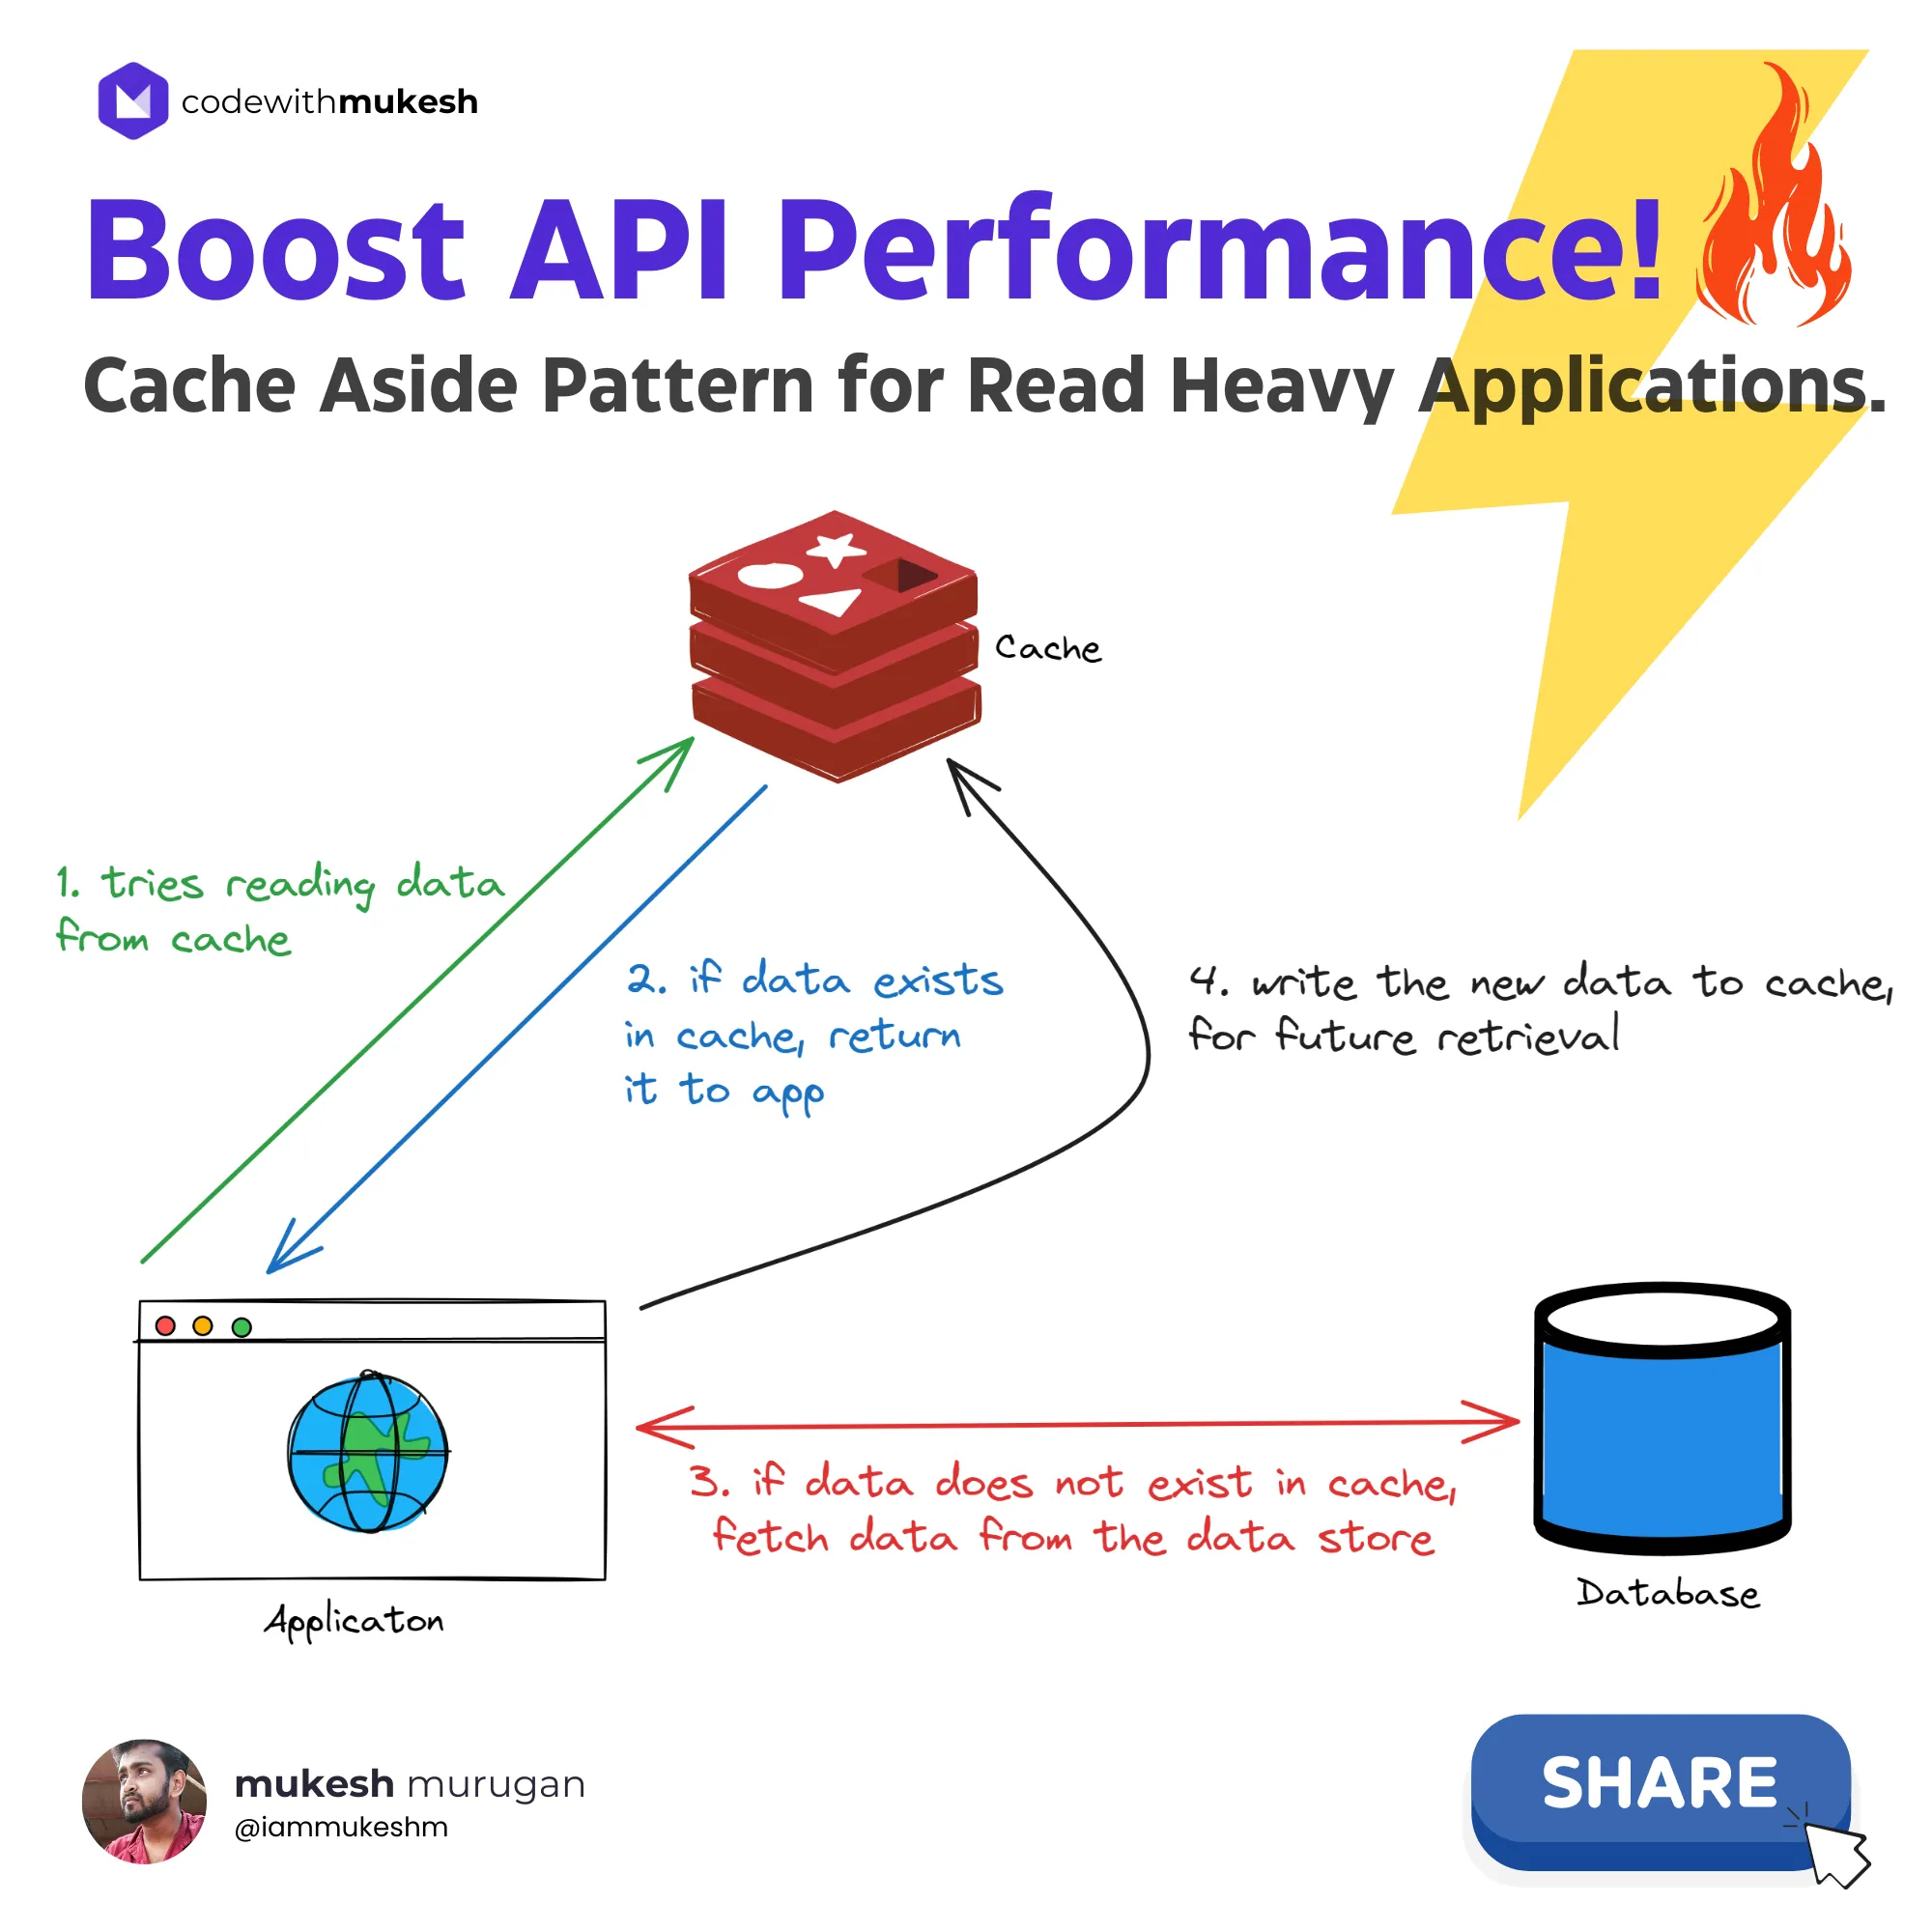 Cache Aside Pattern for Read Heavy Applications